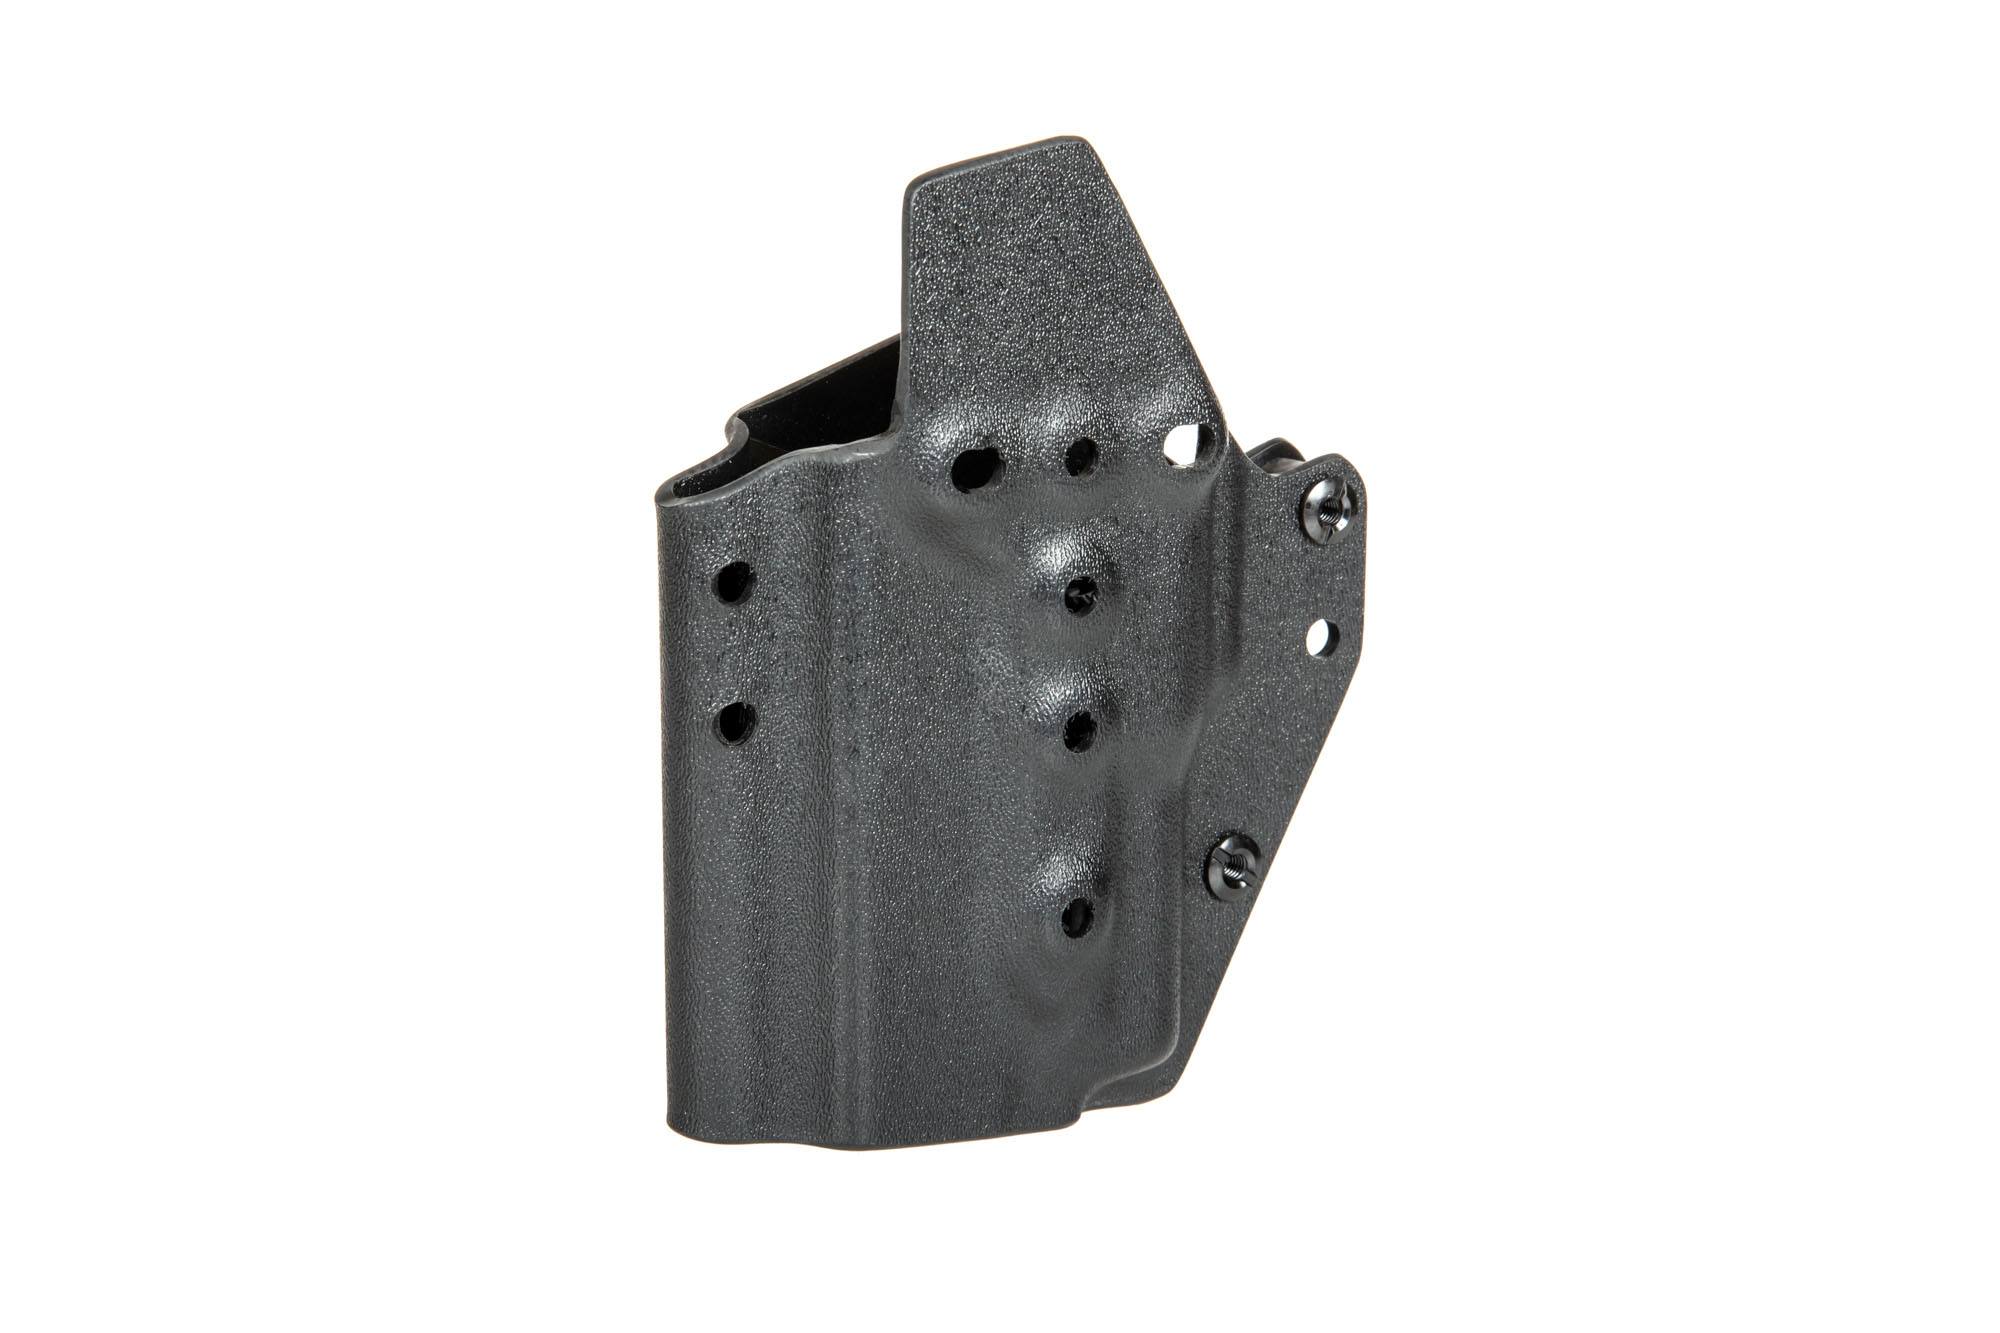 Kydex Holster for G19 replicas with XC1 Flashlight - Black